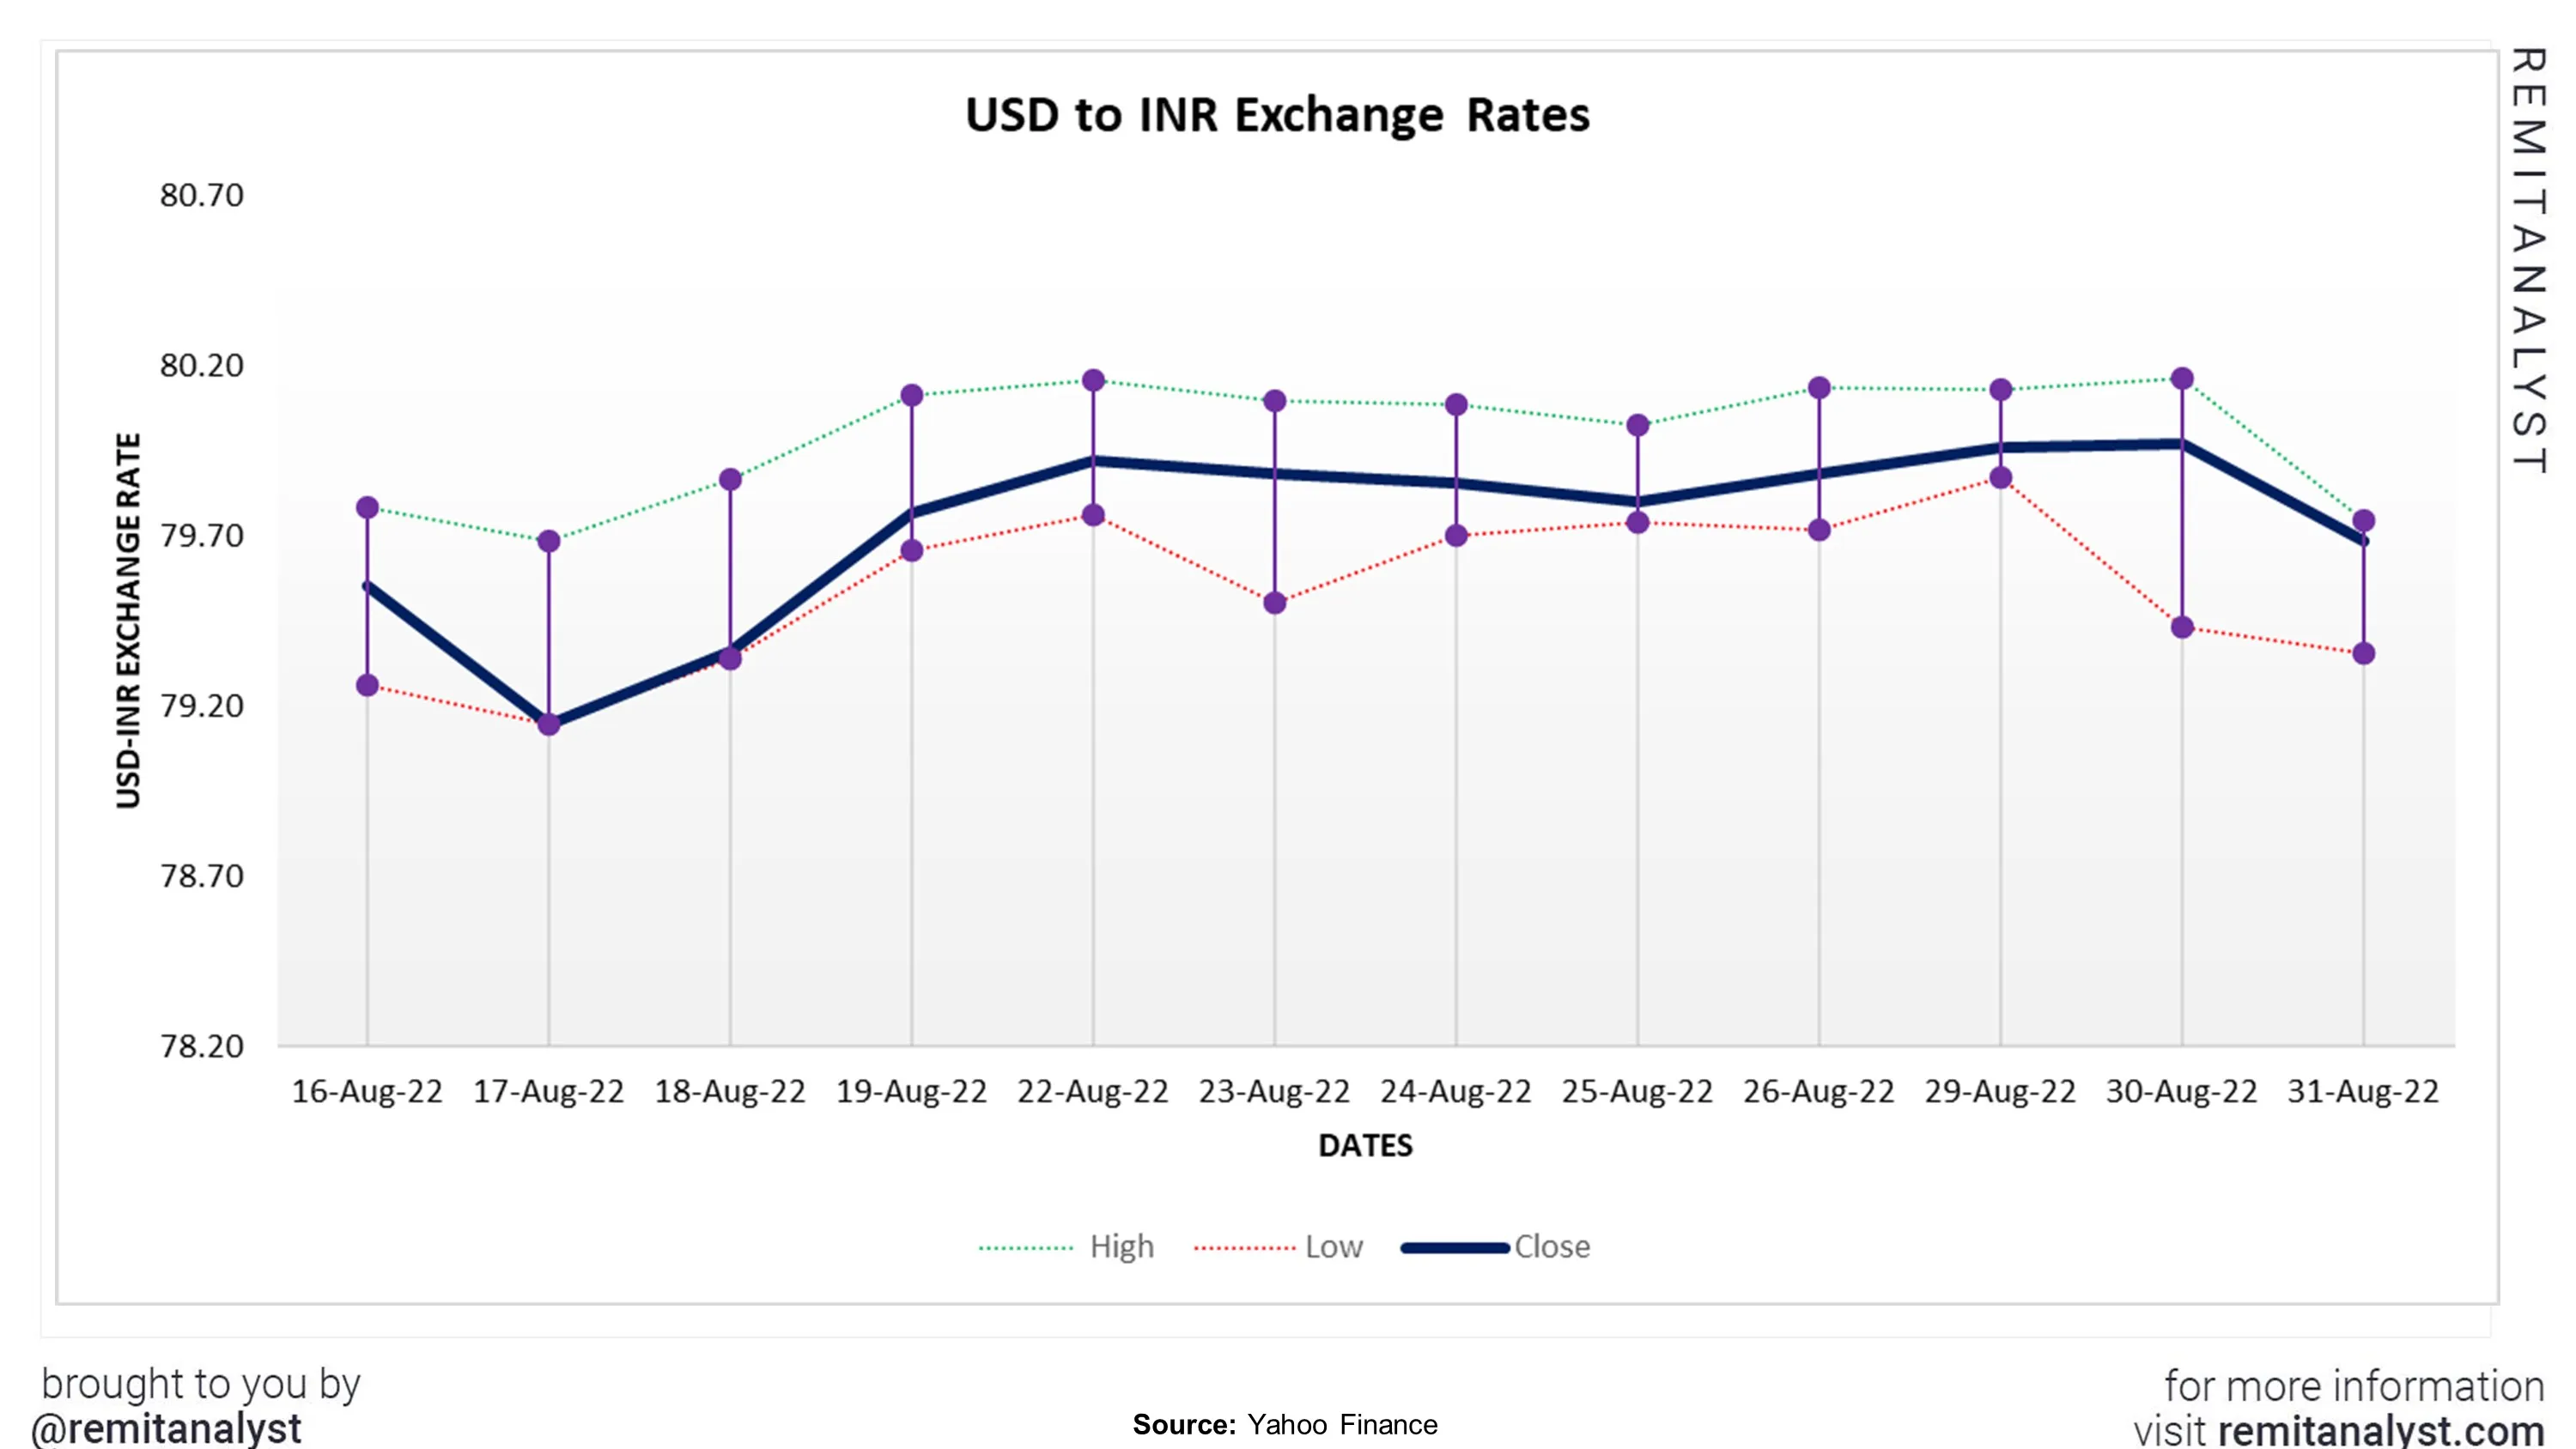 3: Predicted values of USD/INR rates